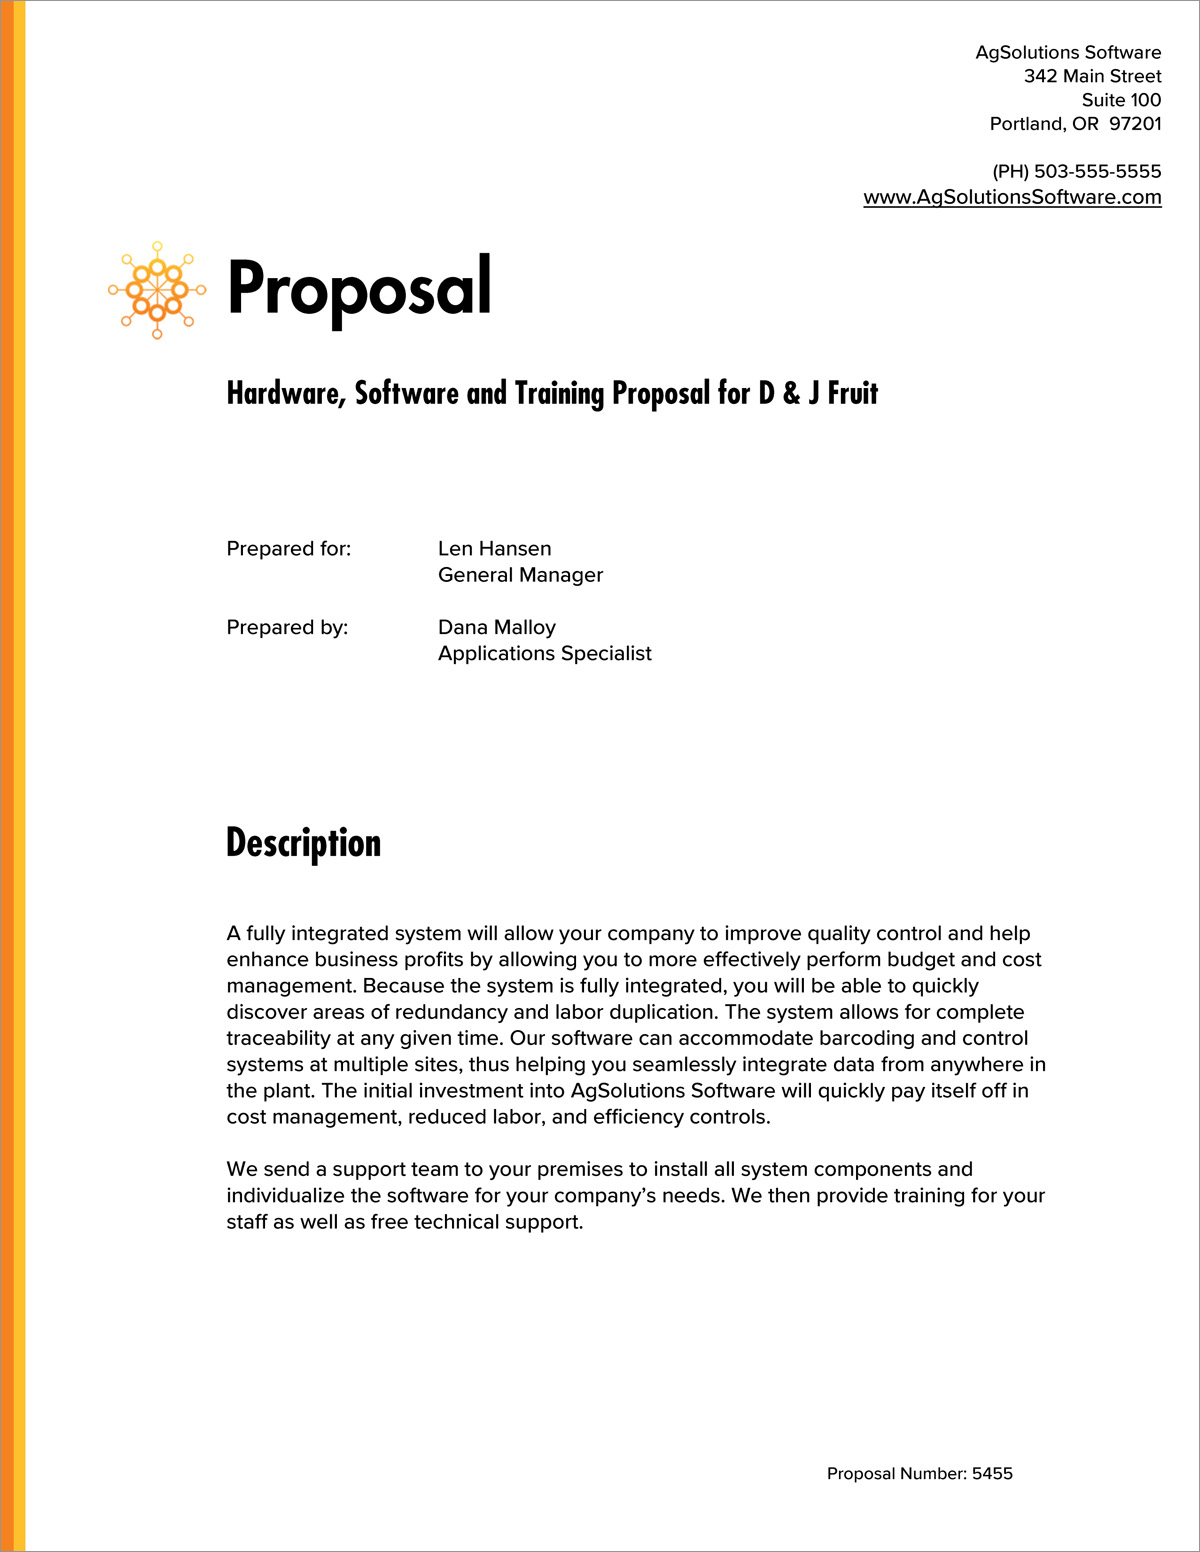 Software and Hardware System Sample Proposal - 20 Steps In Technology Proposal Template